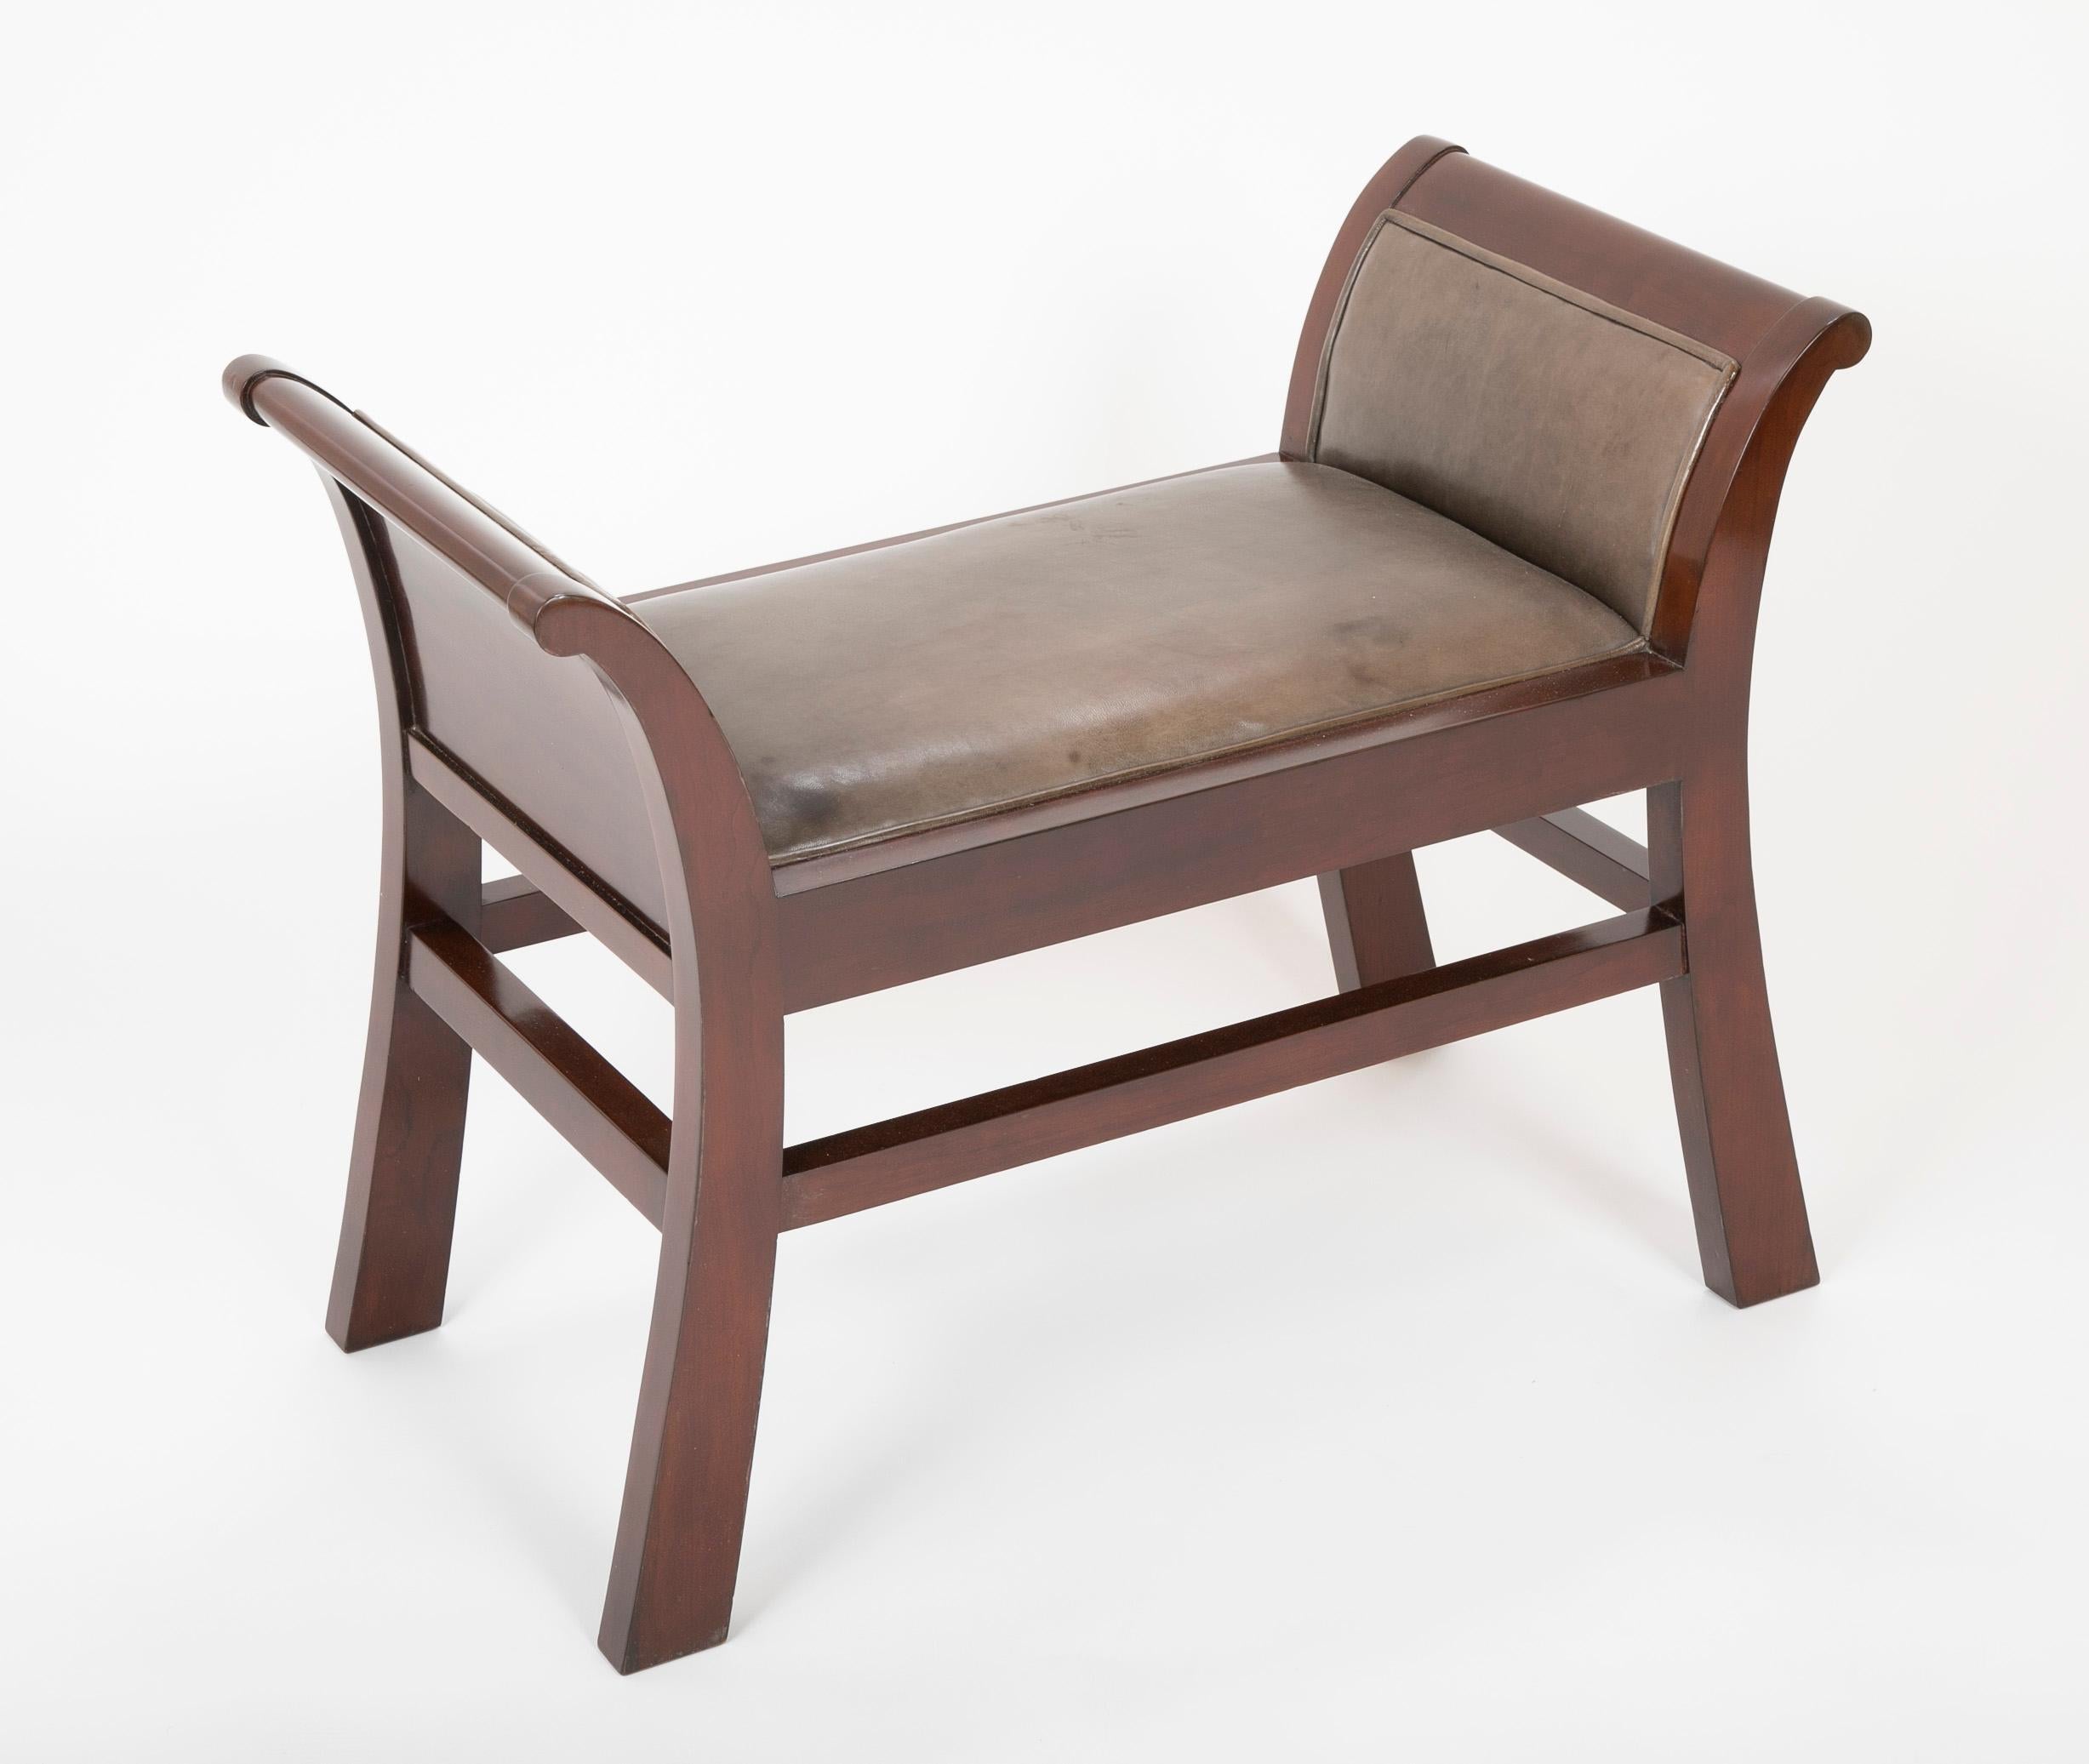 20th Century Pair of Leather Benches Designed by Jacques Grange for John Widdicomb